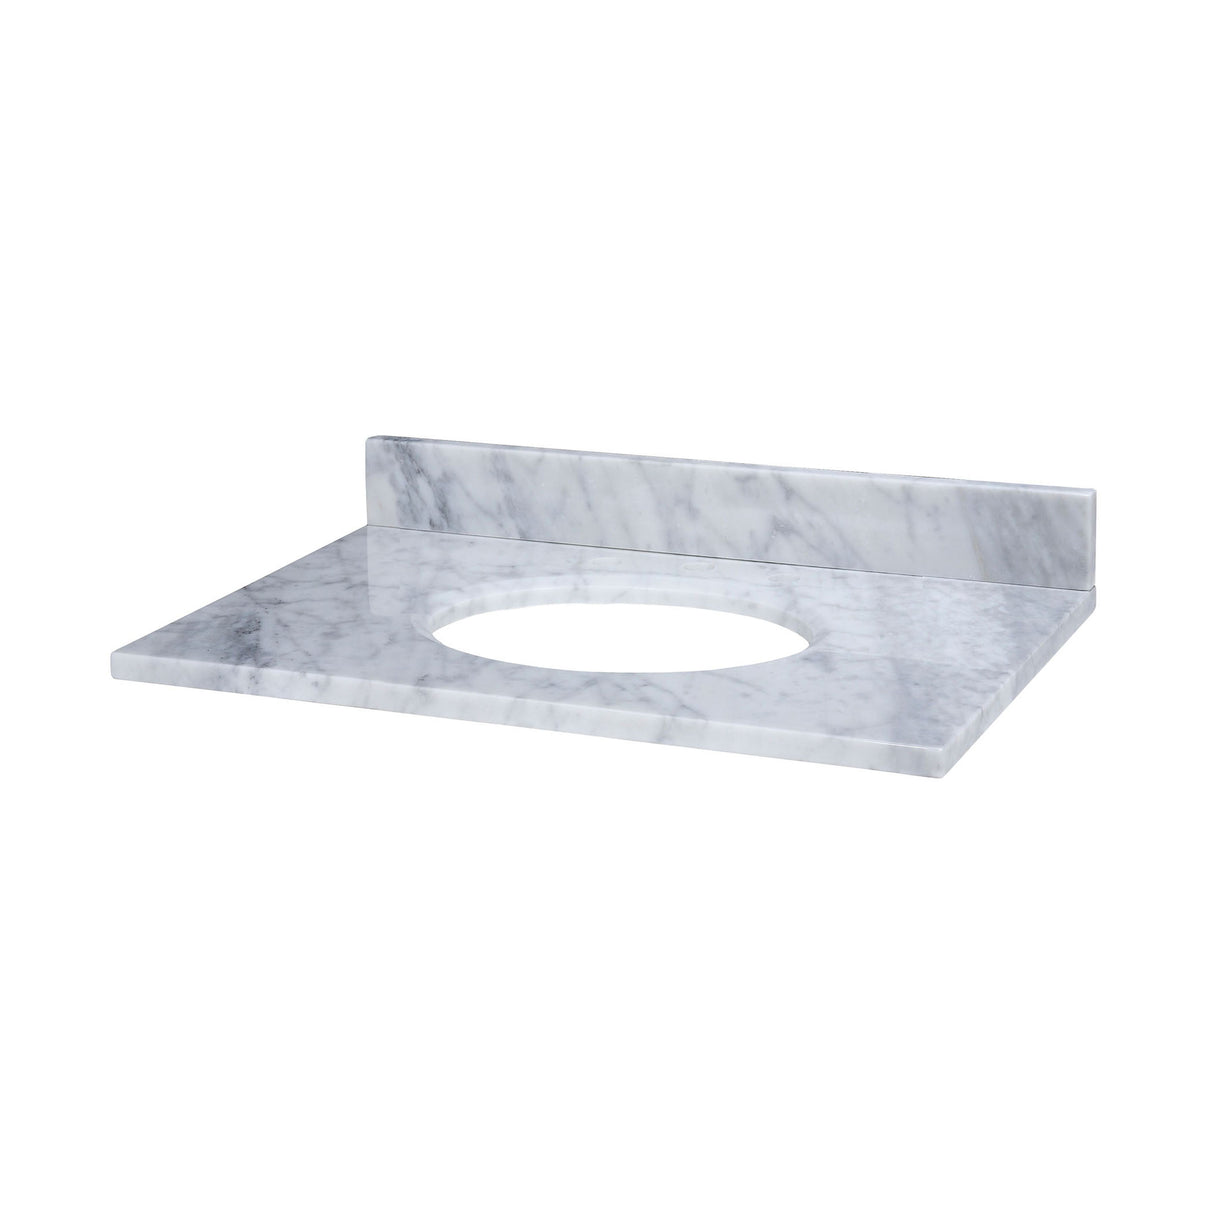 Elk MAUT250WT Stone Top - 25-inch for Oval Undermount Sink - White Carrara Marble